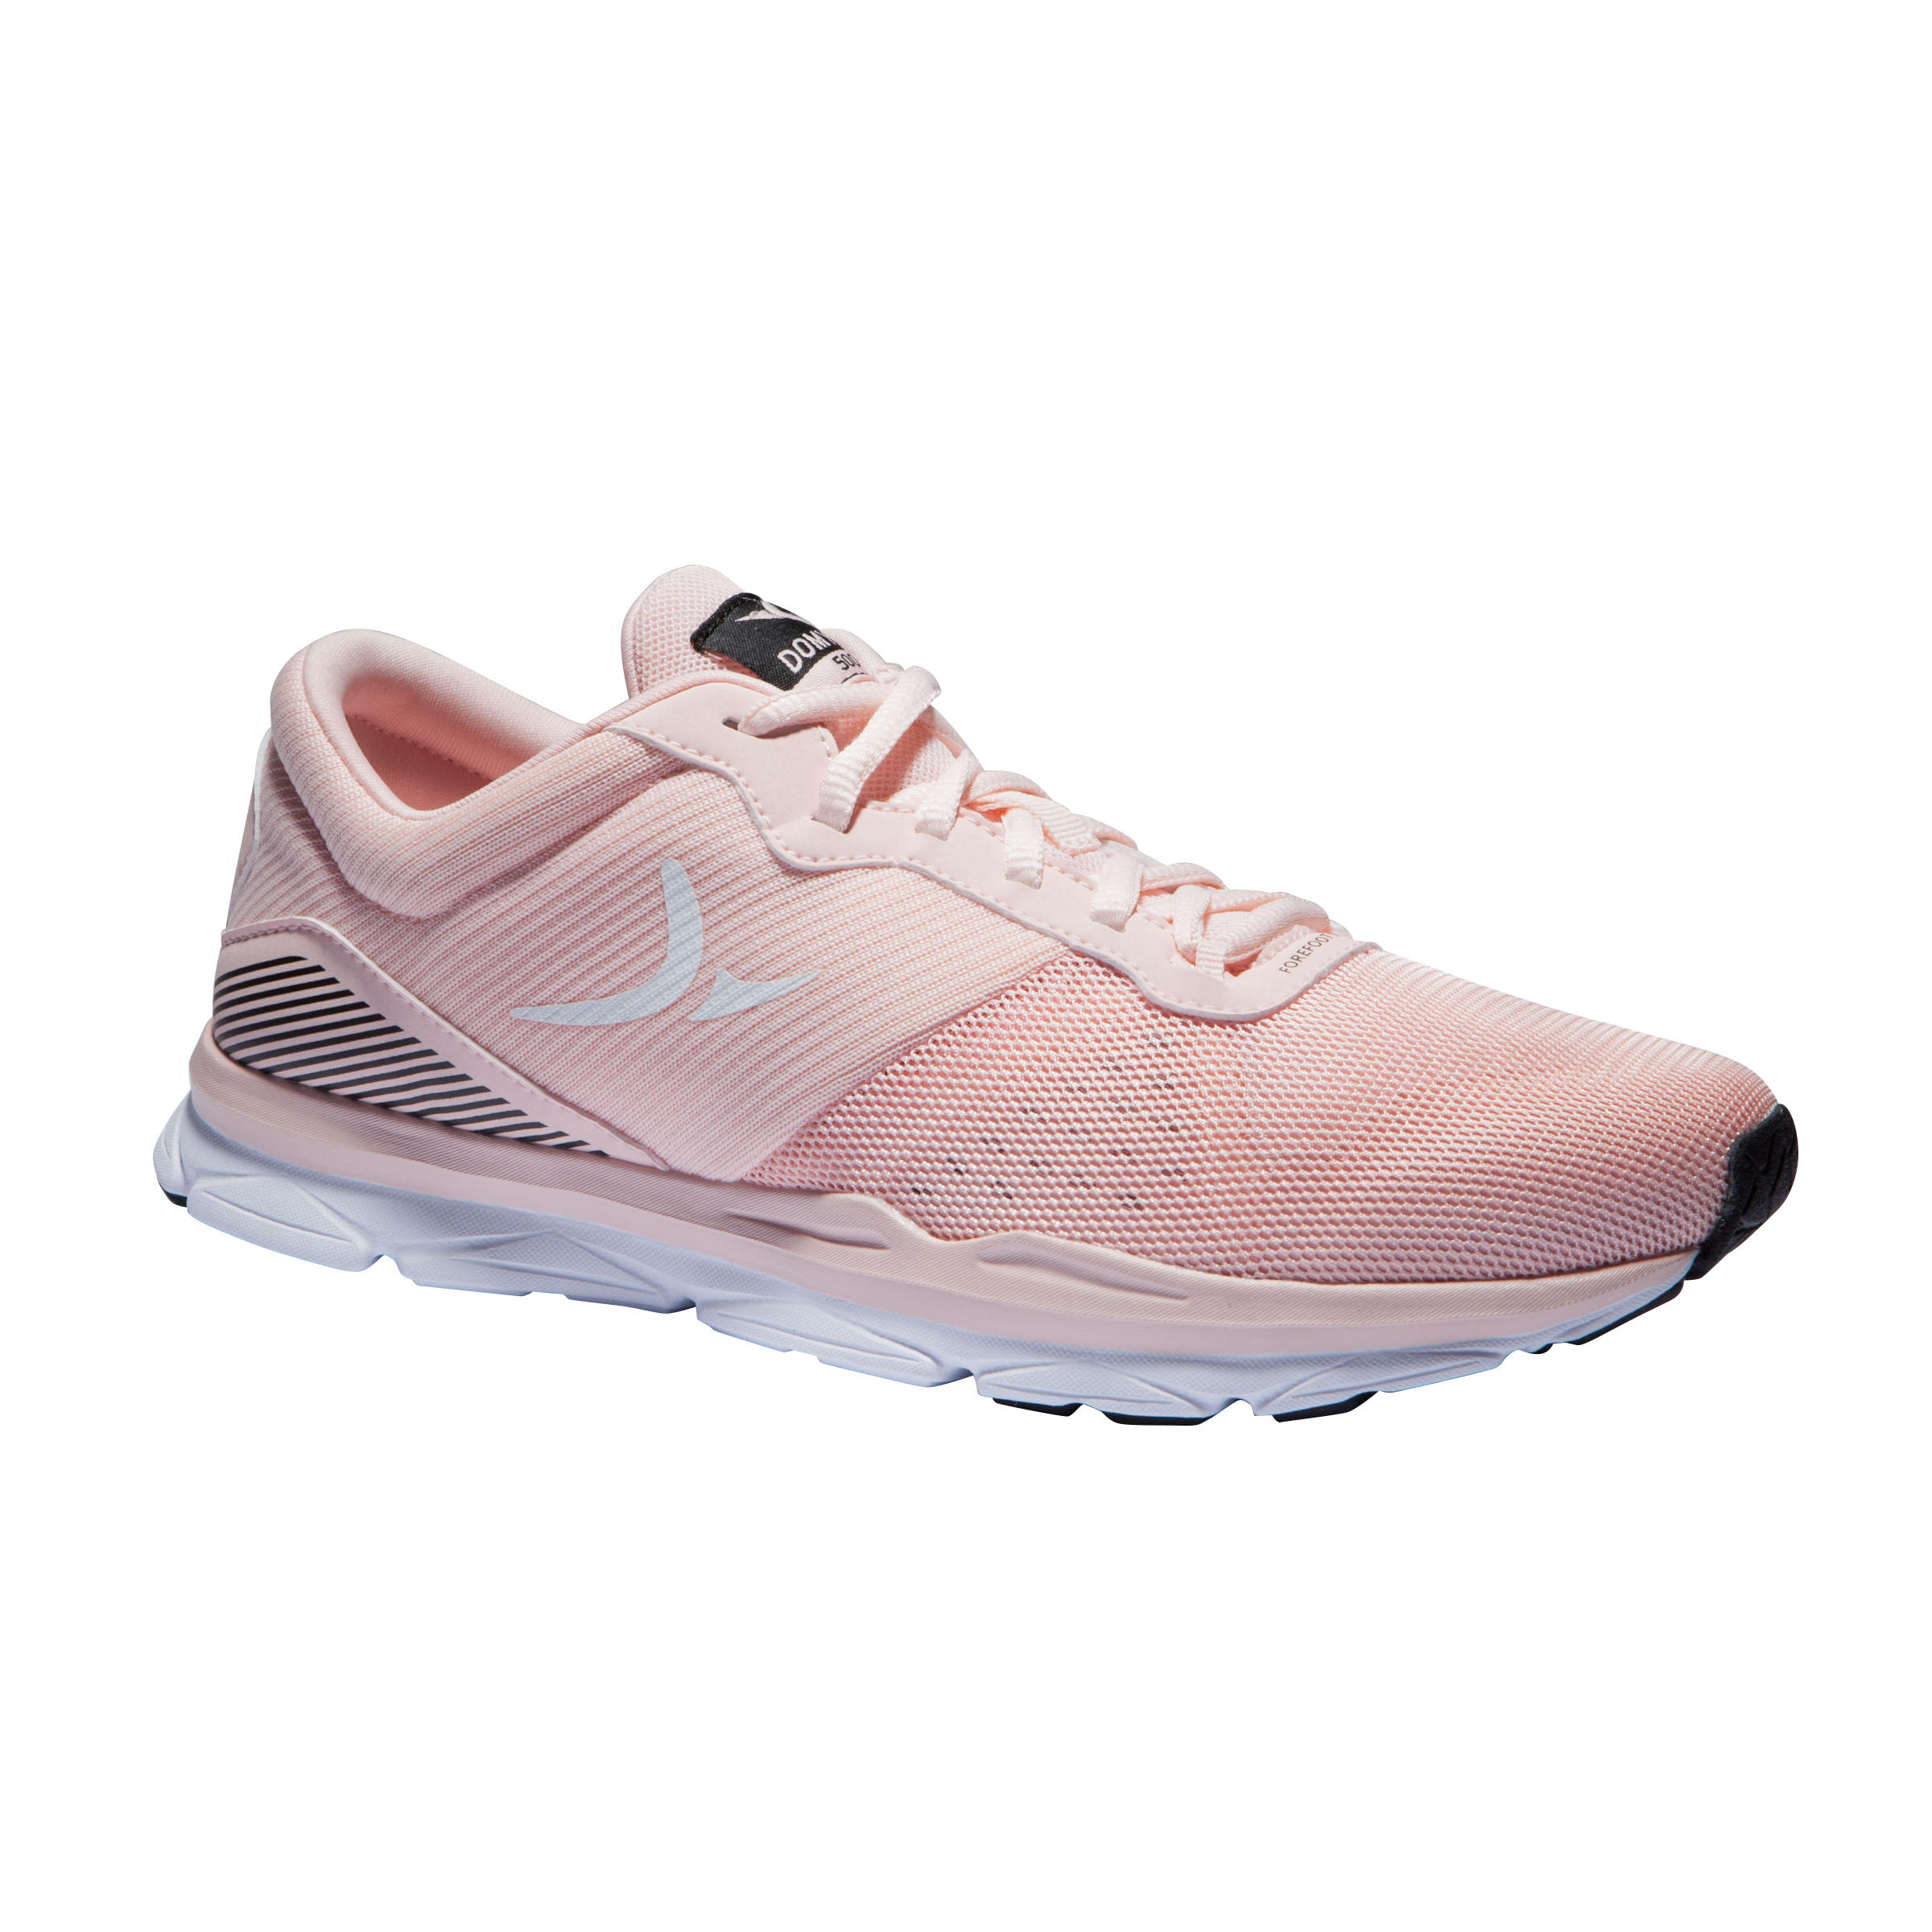 Fitness Cardio Training Shoes - Pink